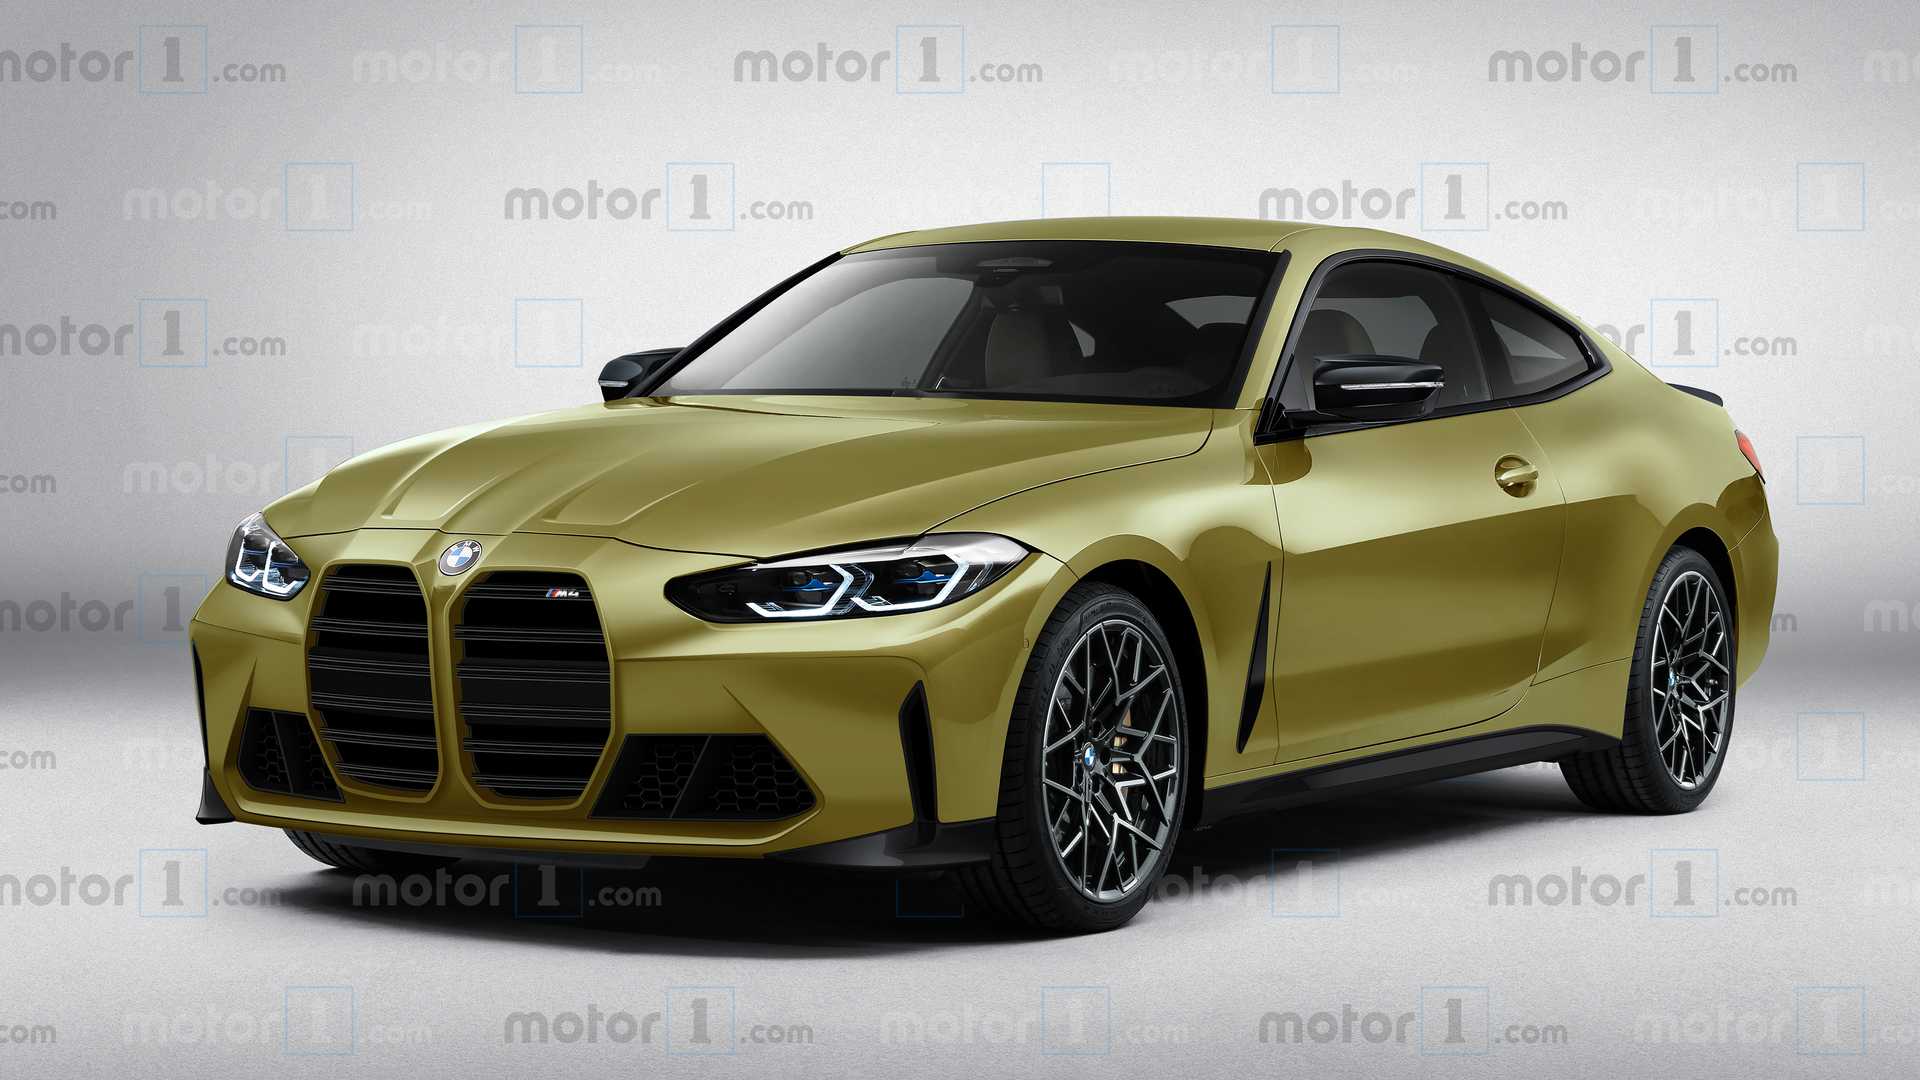 2021-bmw-m4-coupe-rendering-by-motor1.com